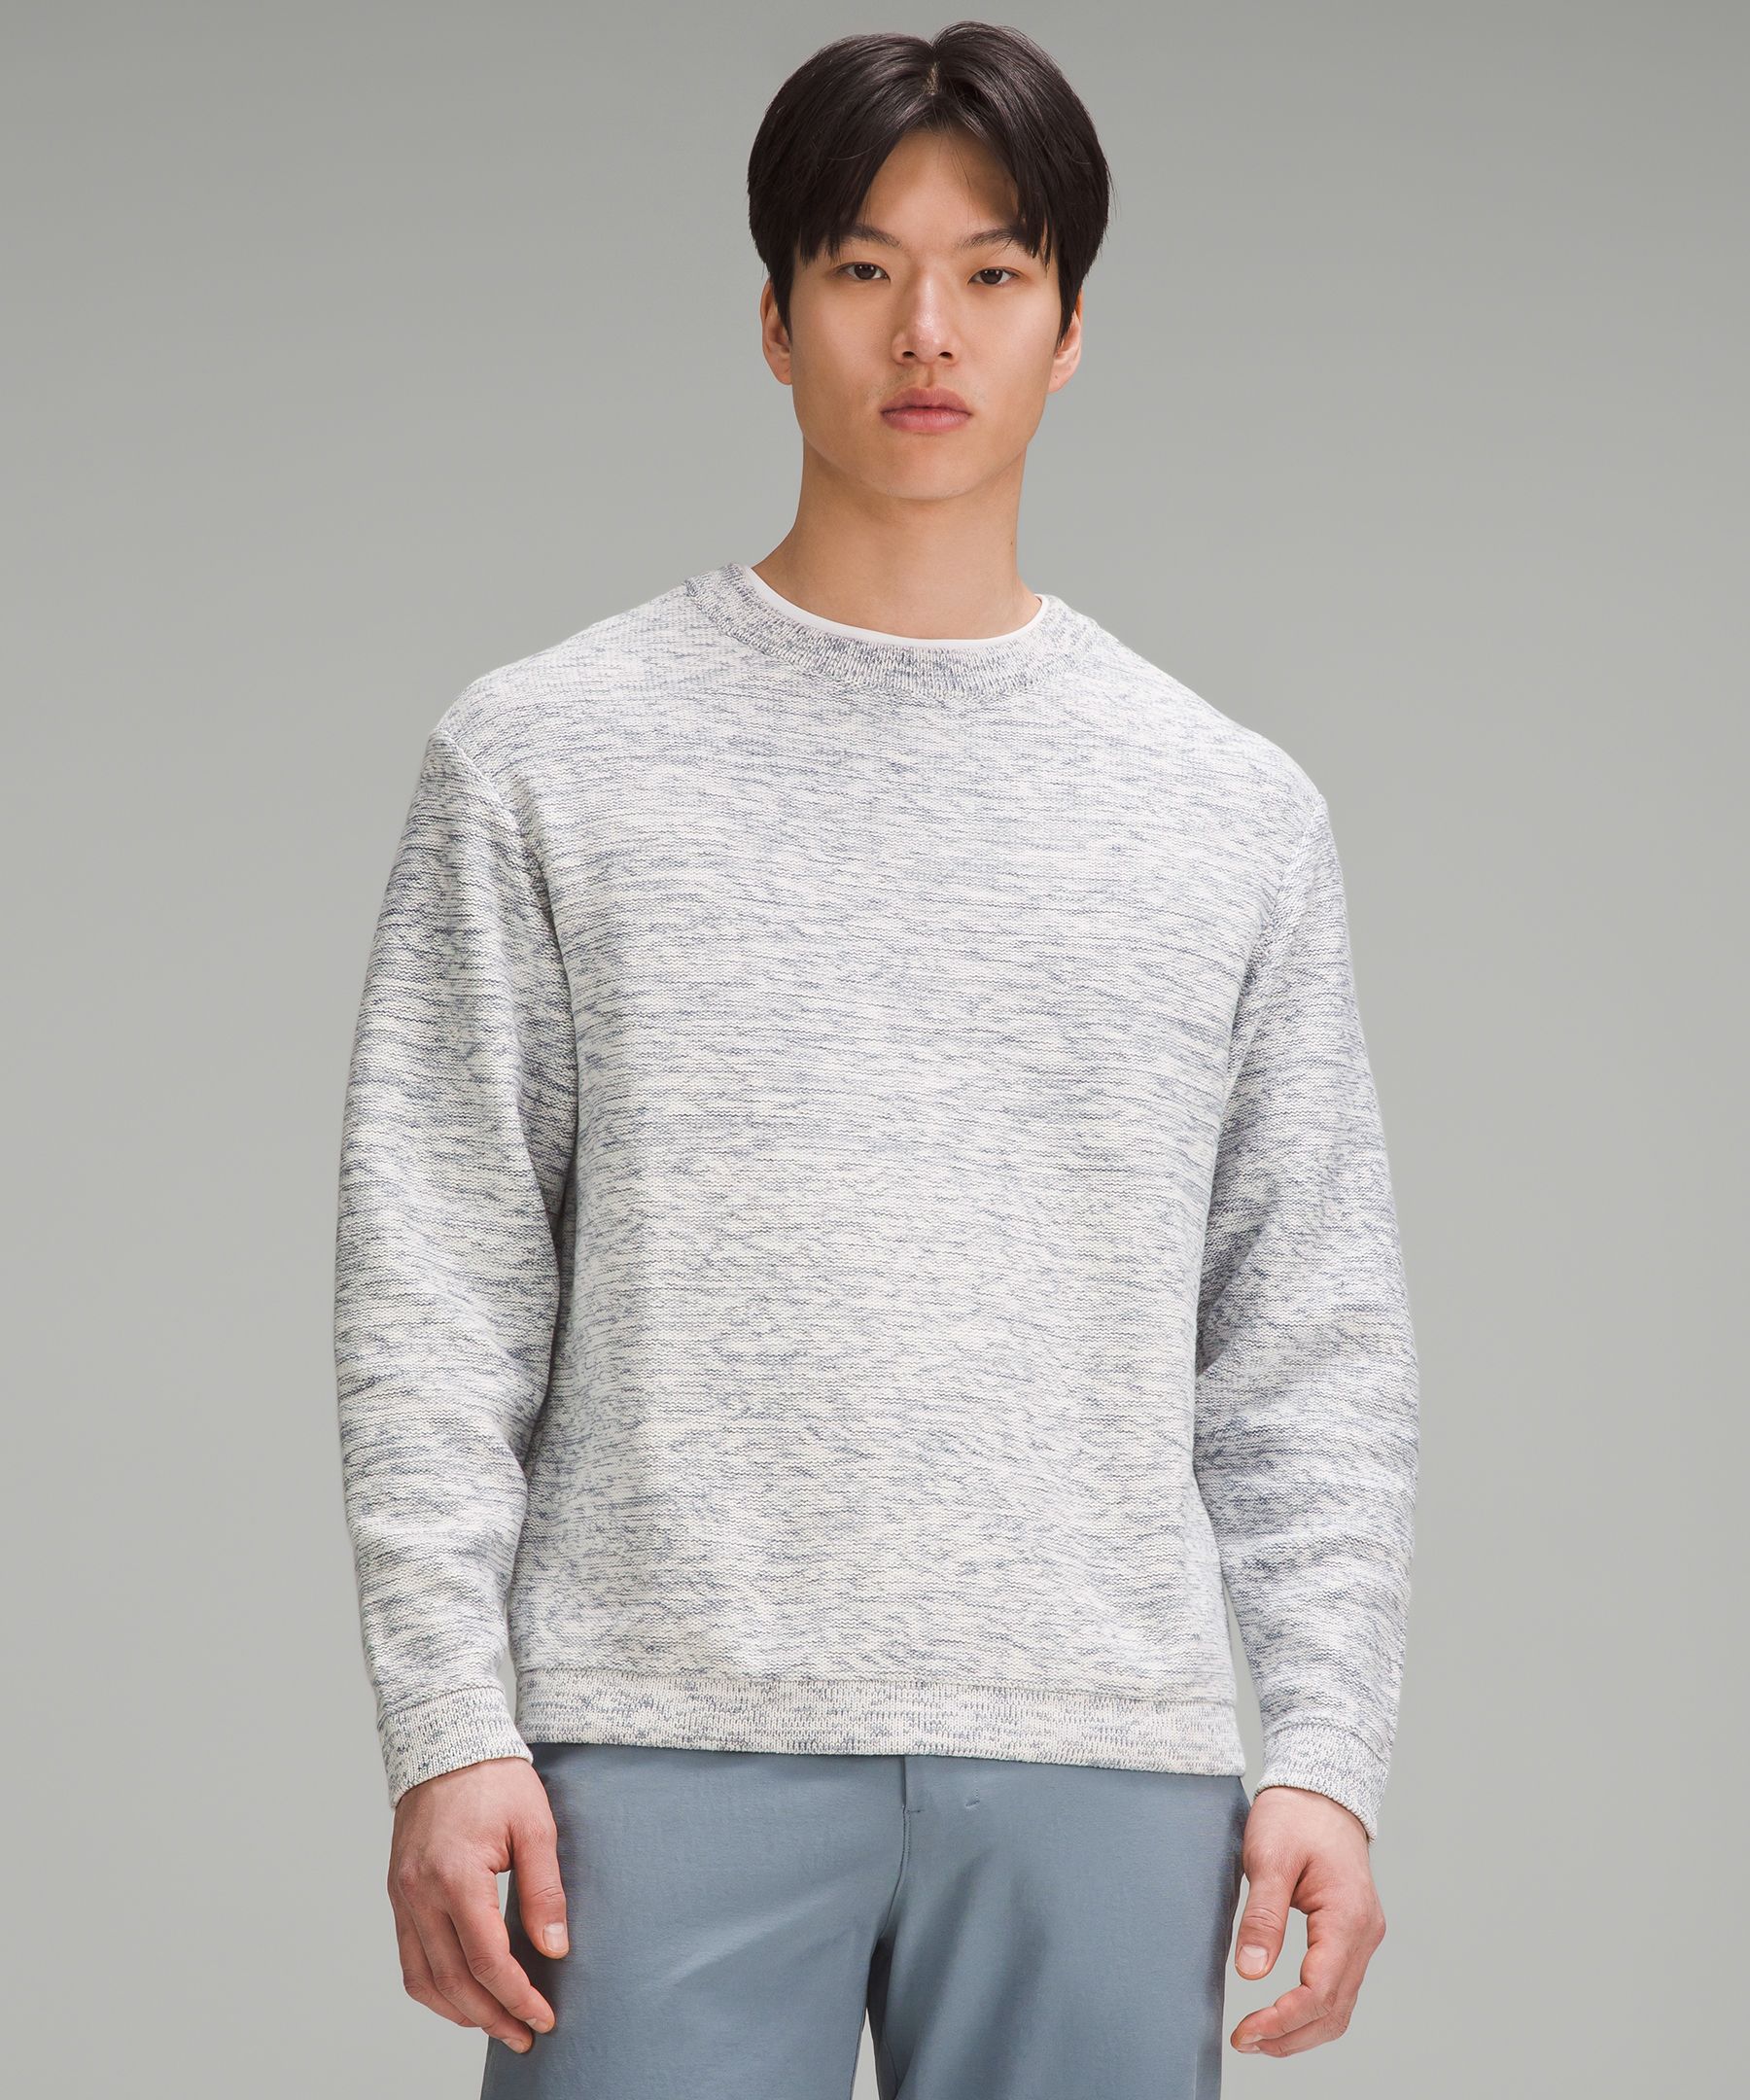 Lululemon Relaxed-fit Crewneck Knit Sweater